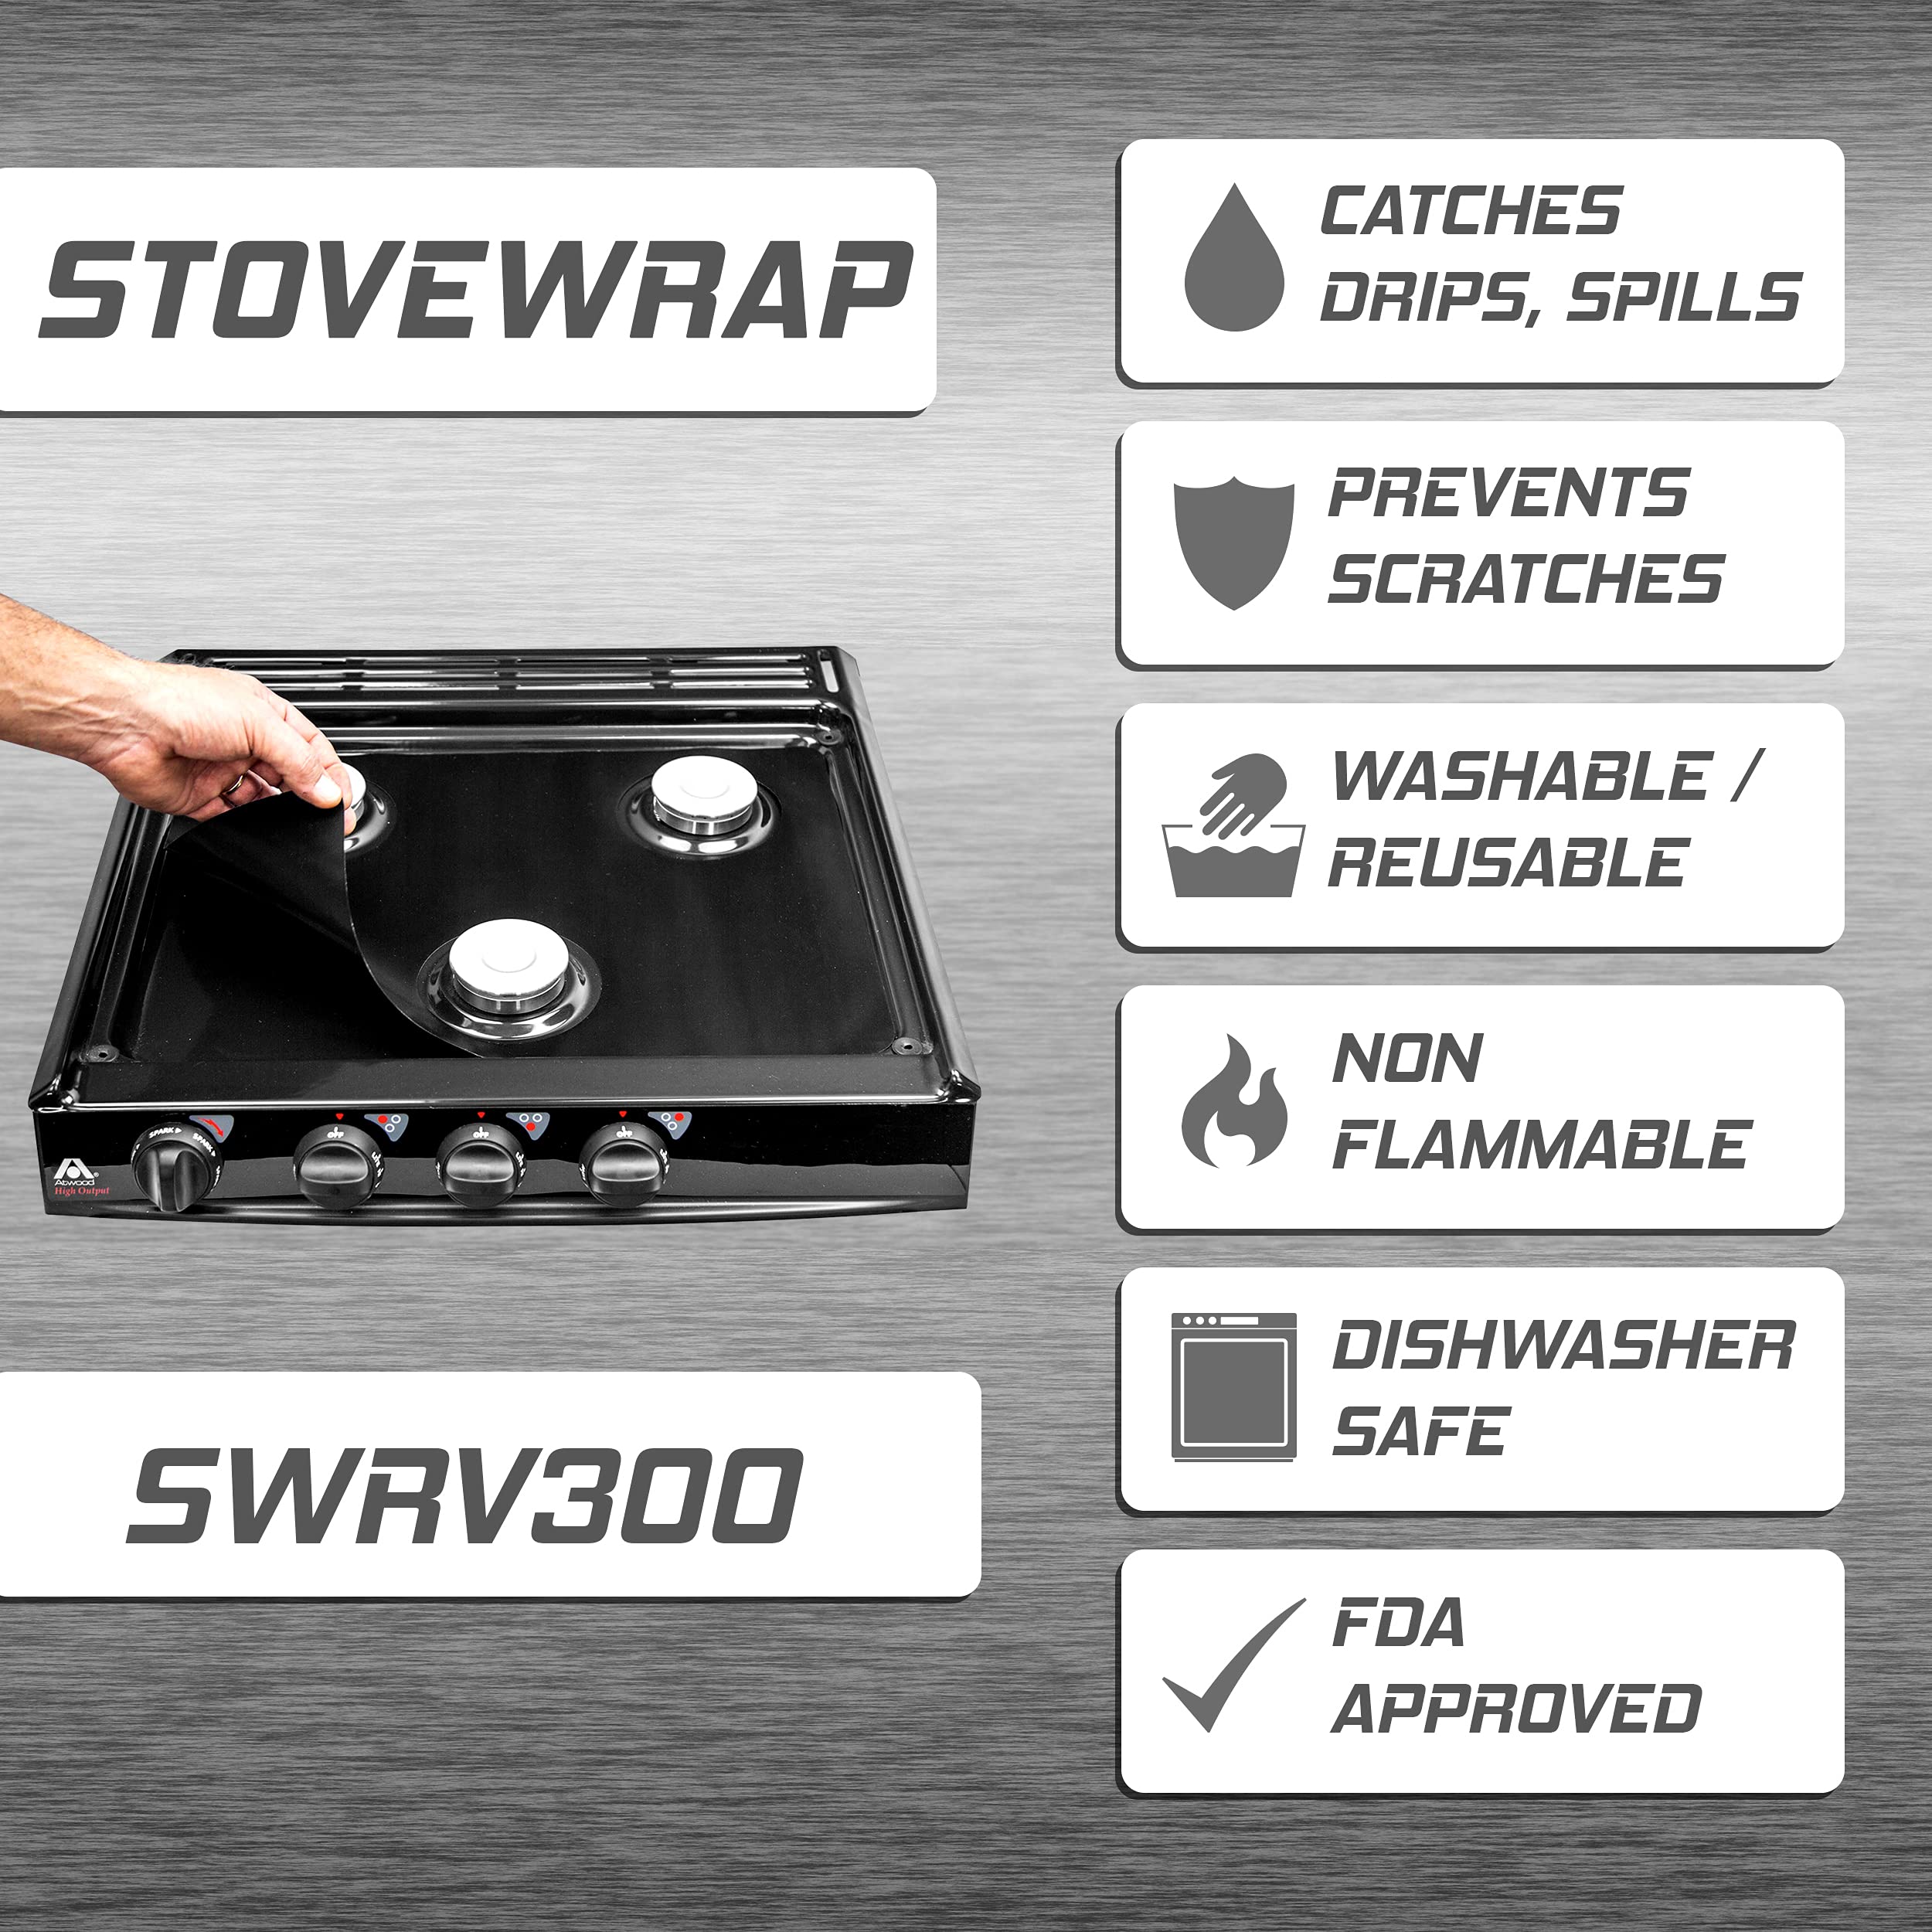 Stove Wrap SWRV600 Stove Top and Oven Protector